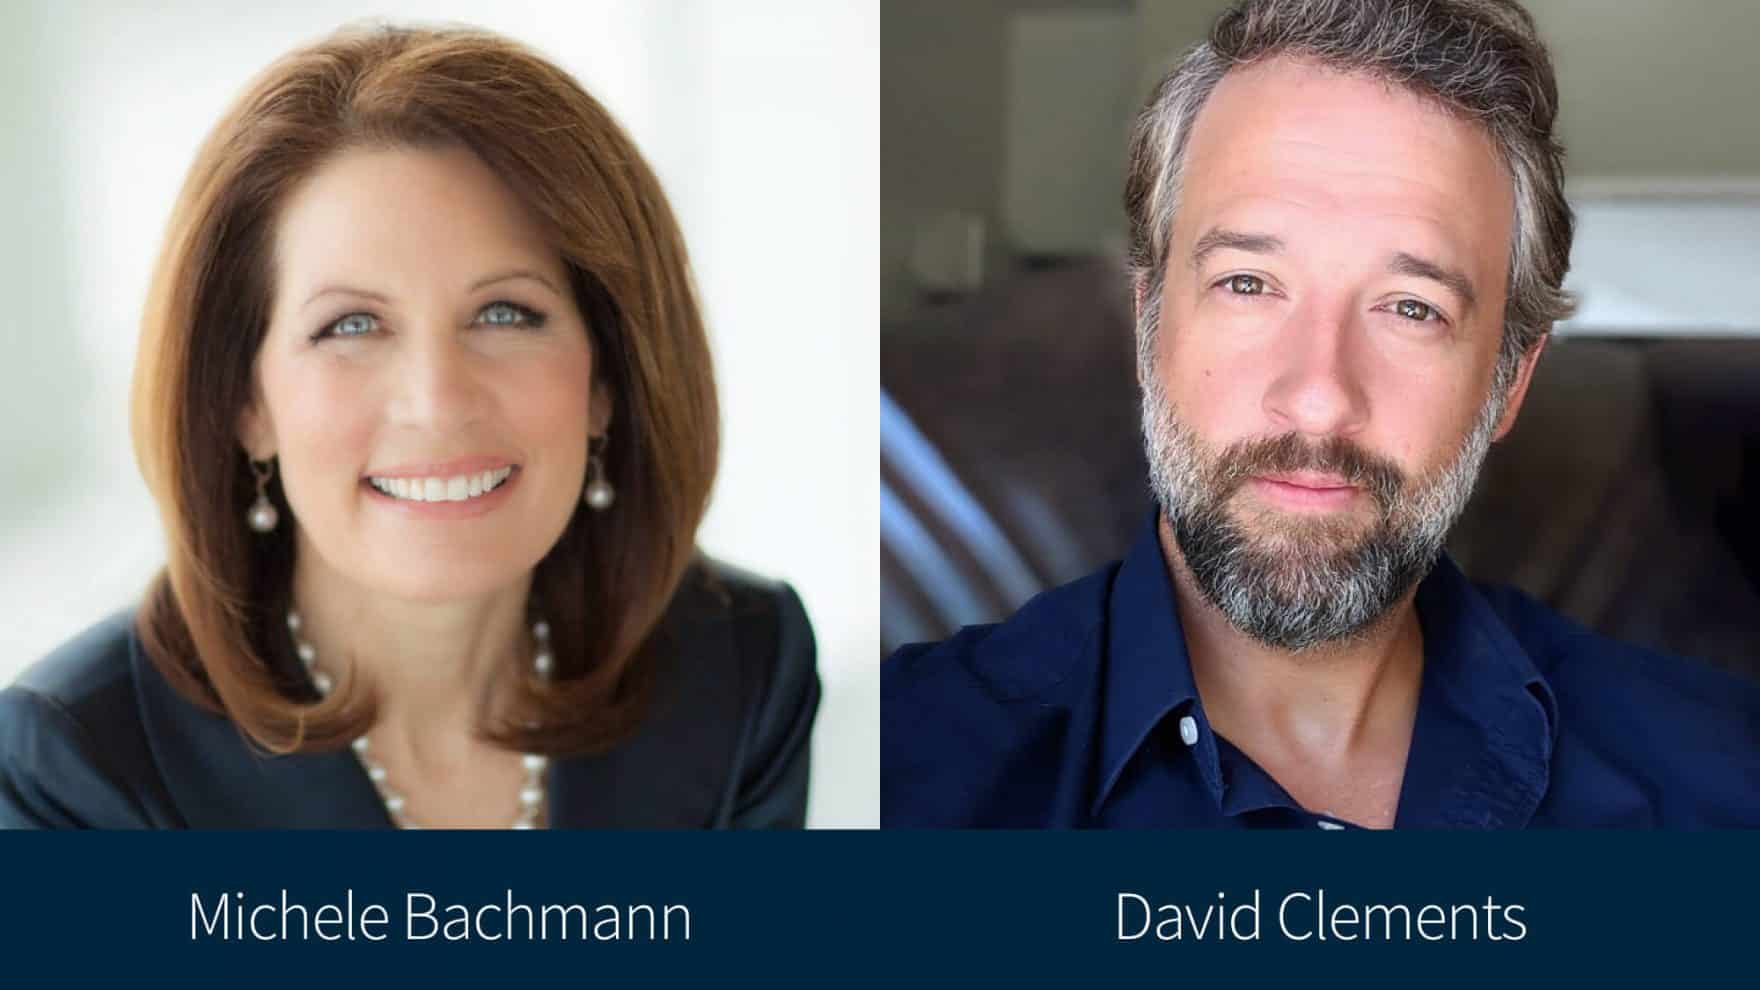 Michele Bachmann and David Clements, the moderator and a speaker of Regent University's conference on election integrity.